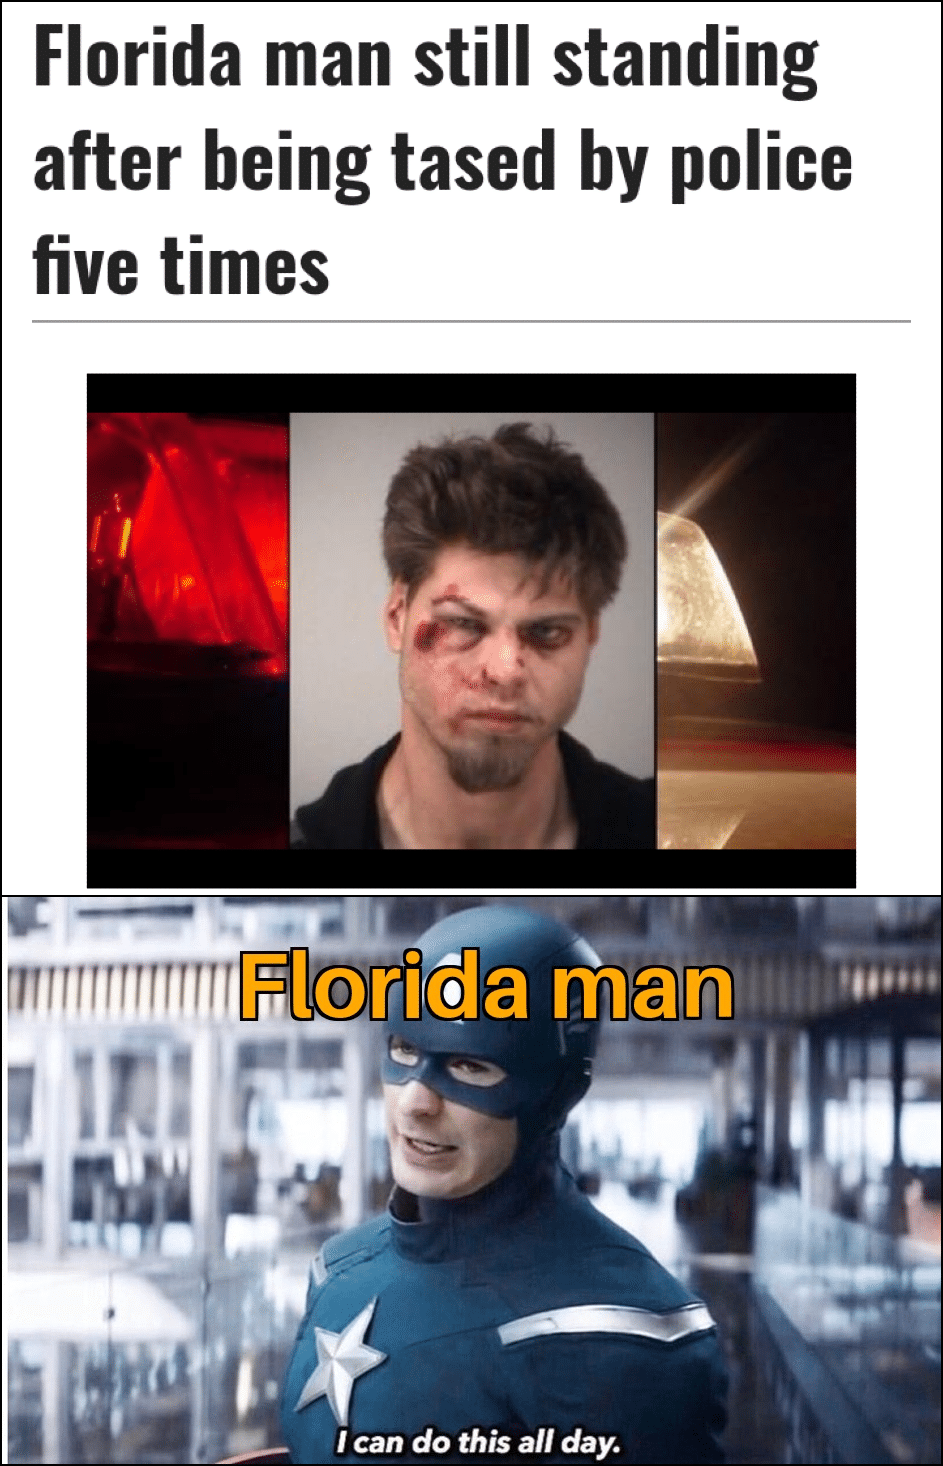 Funny, Florida, Floridians, Florida Man, Eels, Floridian other memes Funny, Florida, Floridians, Florida Man, Eels, Floridian text: Florida man still standing after being tased by police five times FloriGla man I can do this all day. 